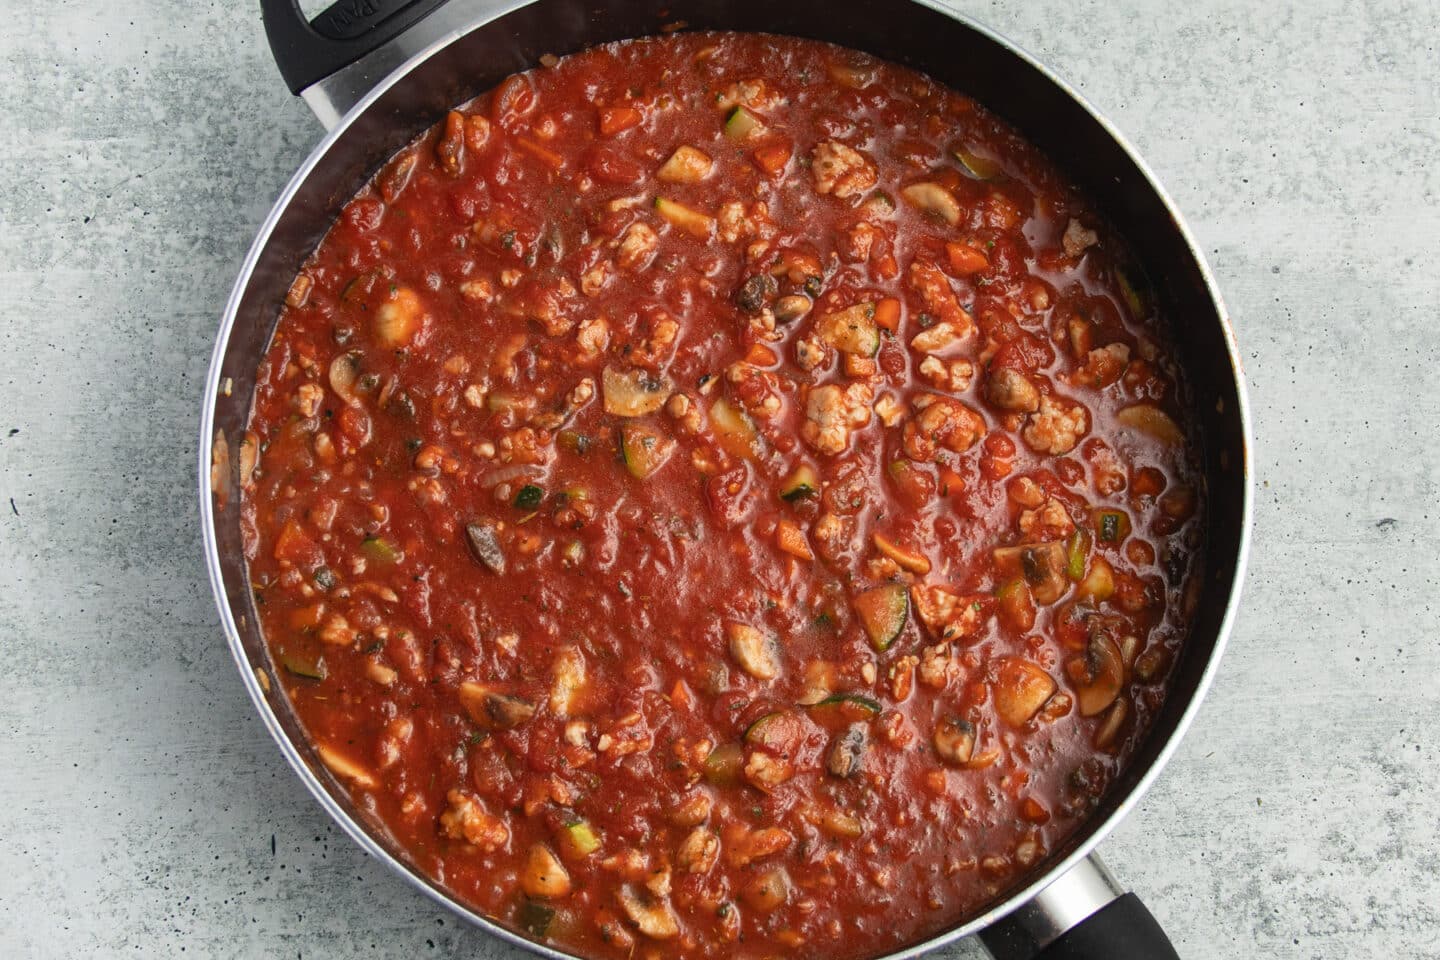 This is a picture of the ground chicken bolognese sauce simmering in a skillet.